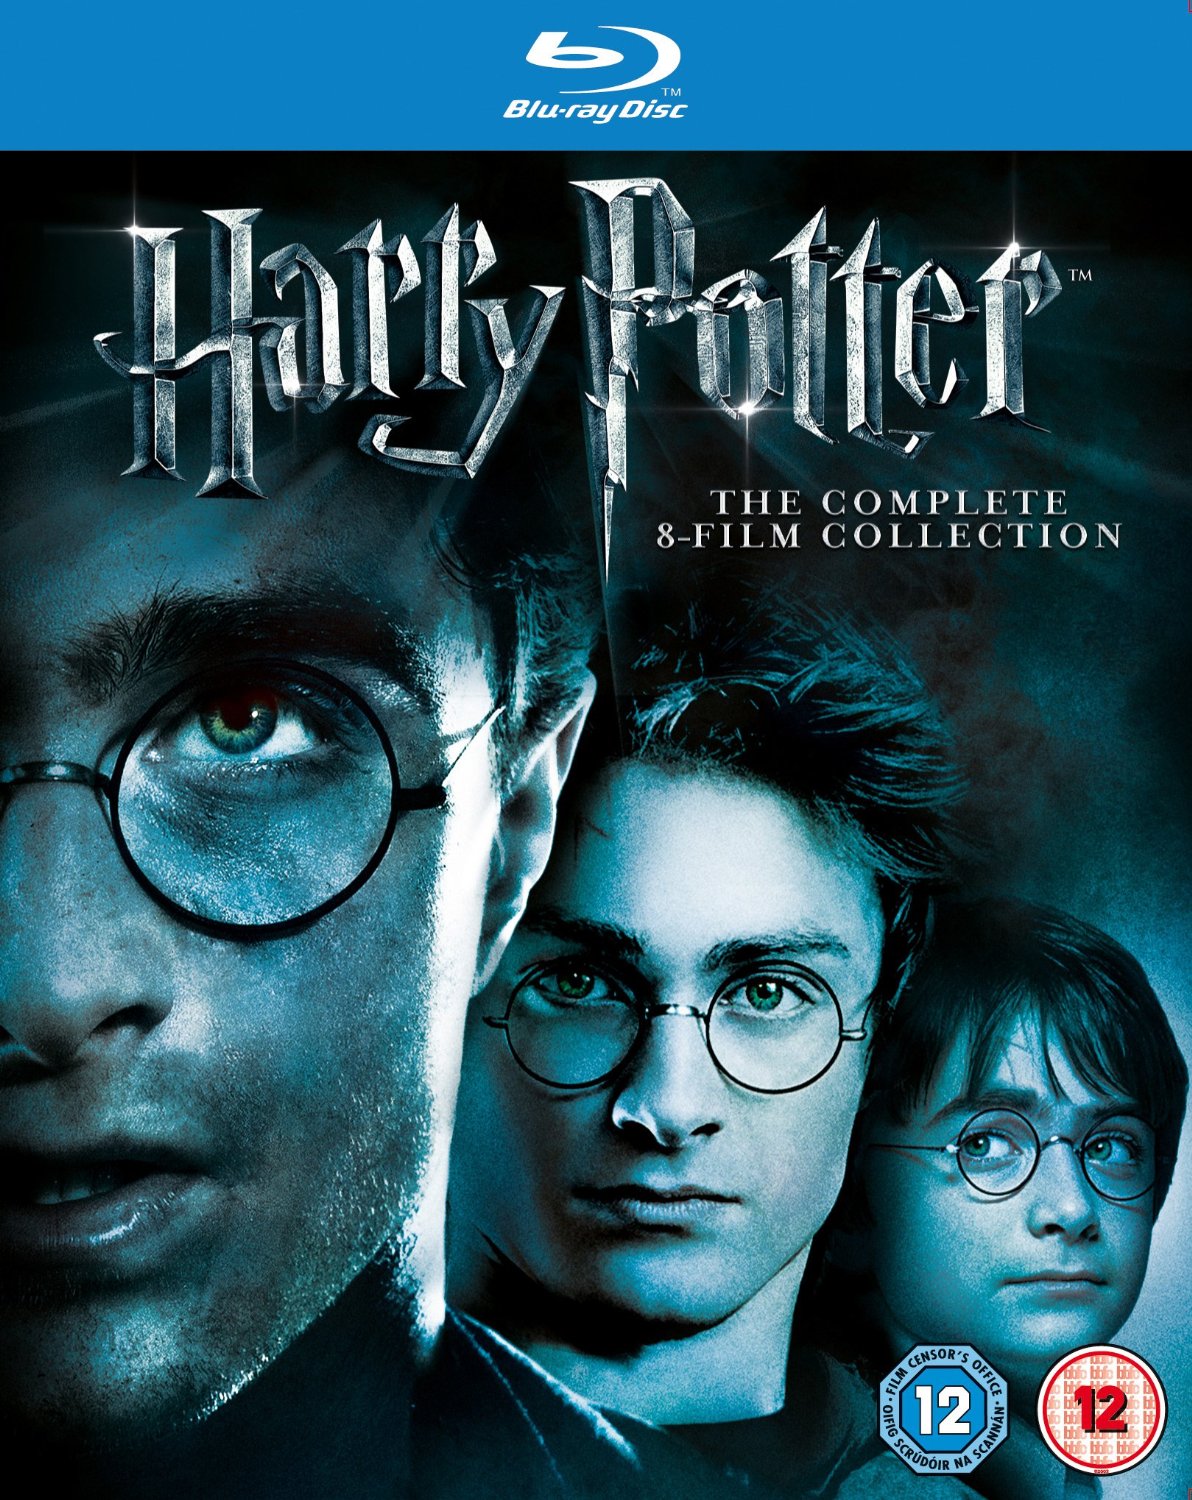 Check out this great price on the "Harry Potter: The Complete 8 Film